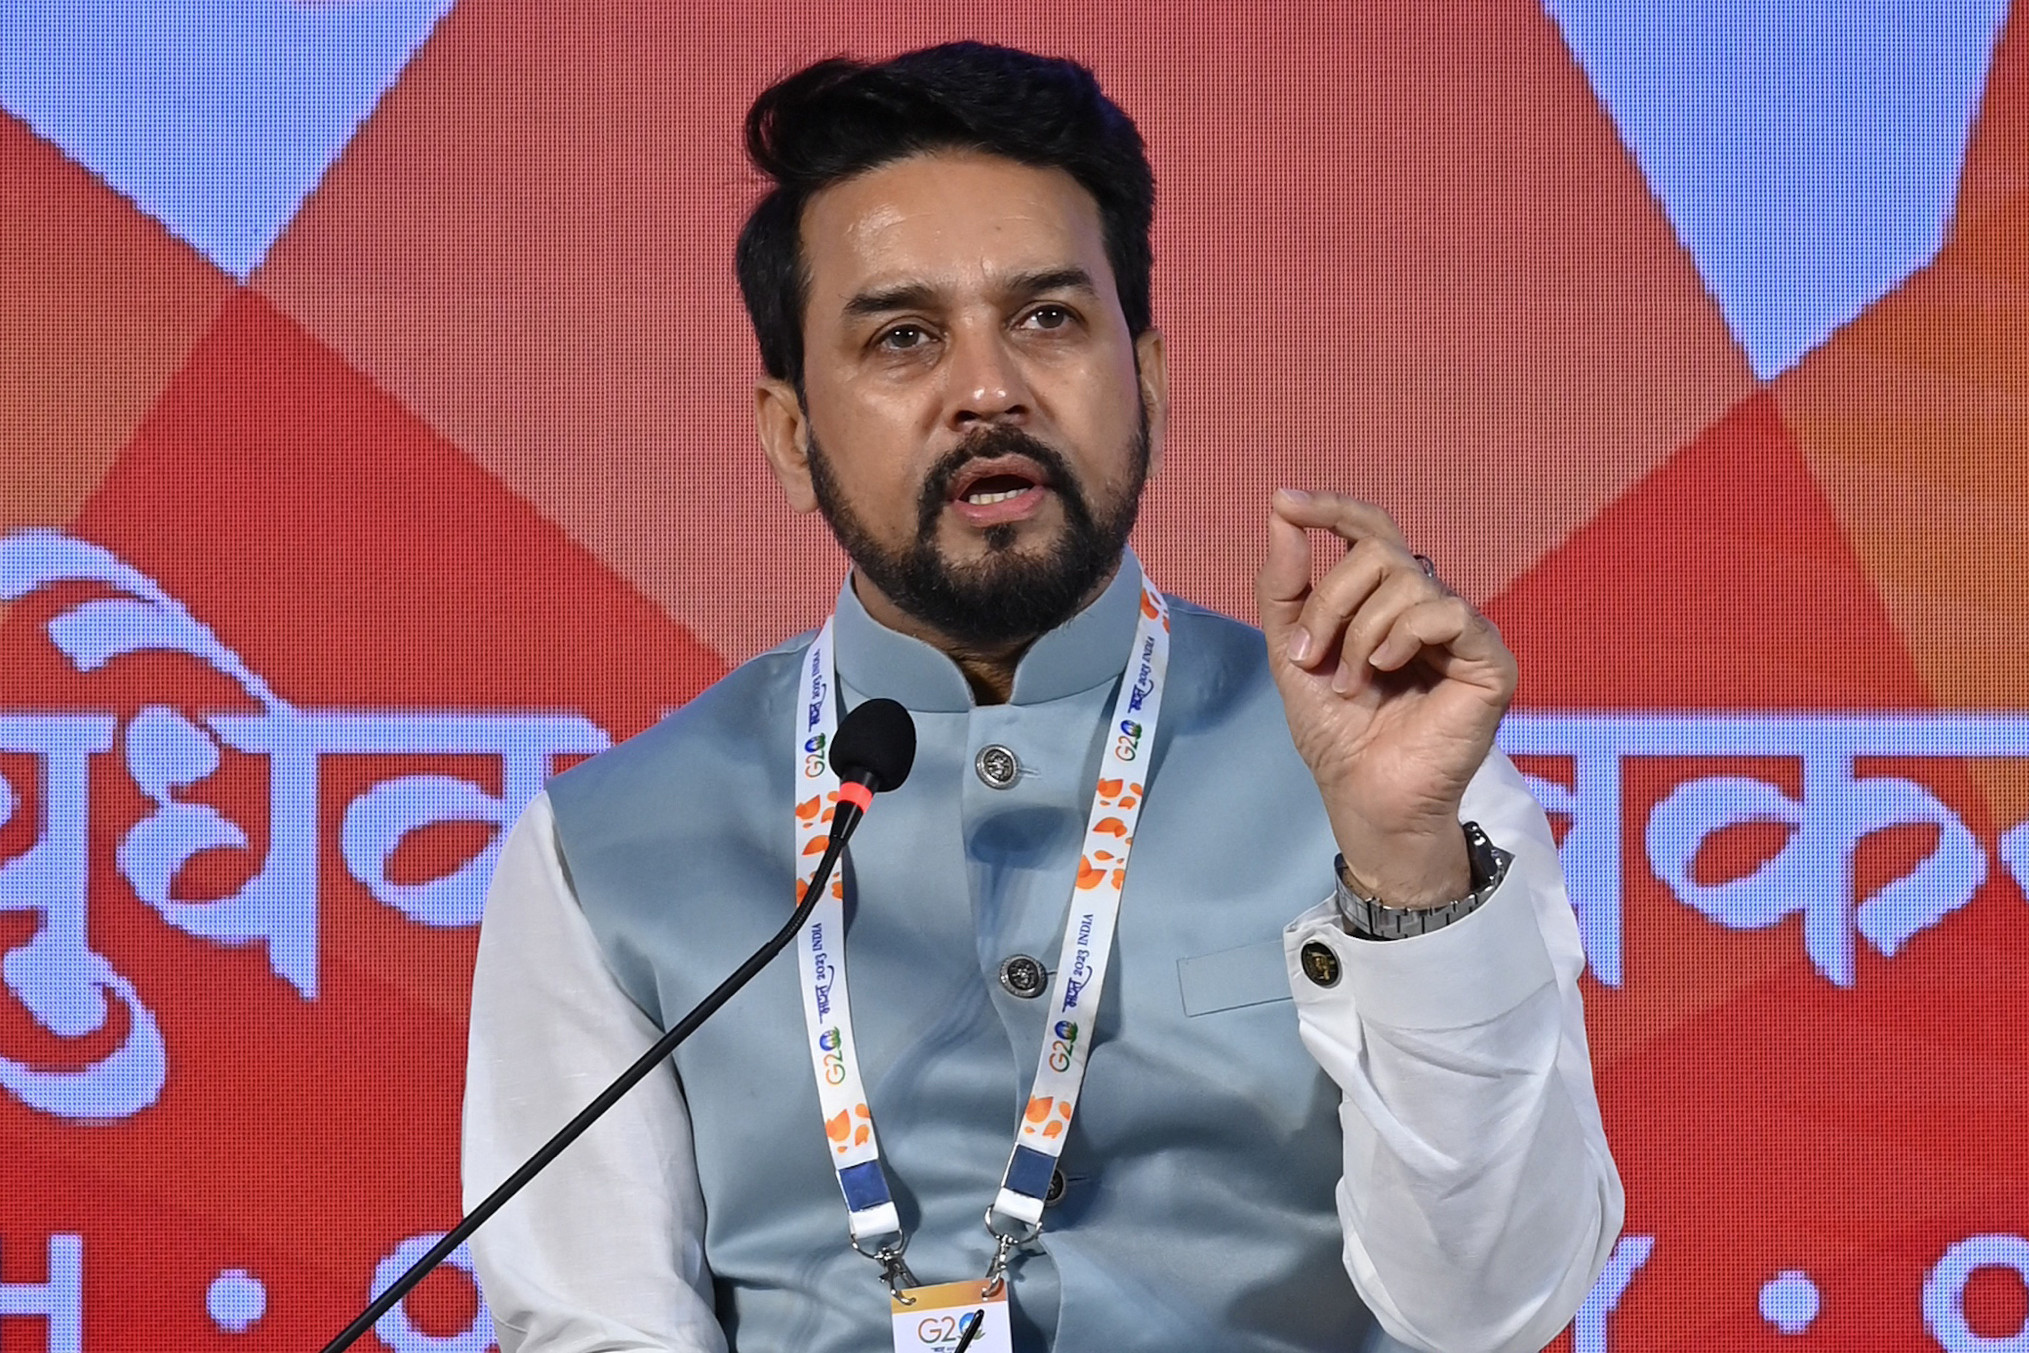 Sports Minister Anurag Thakur has urged wrestlers not to take any extreme step until the police investigation concludes ©Getty Images